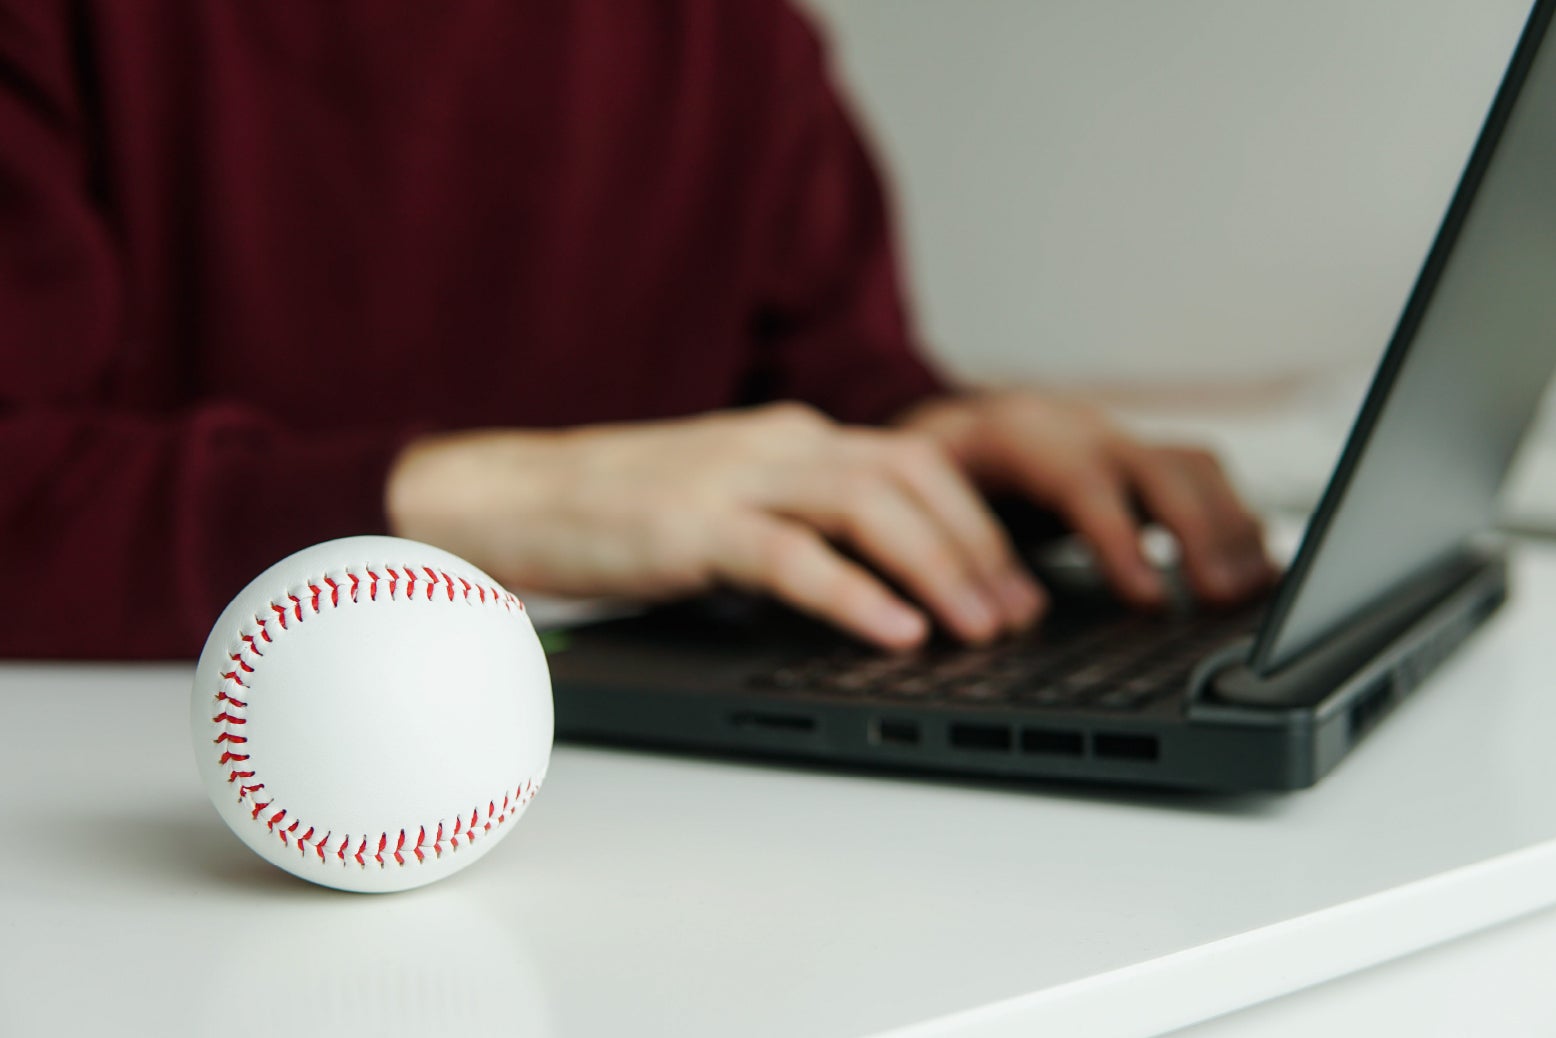 A man checking baseball stats on a laptop. A white baseball sits next to him on the table.